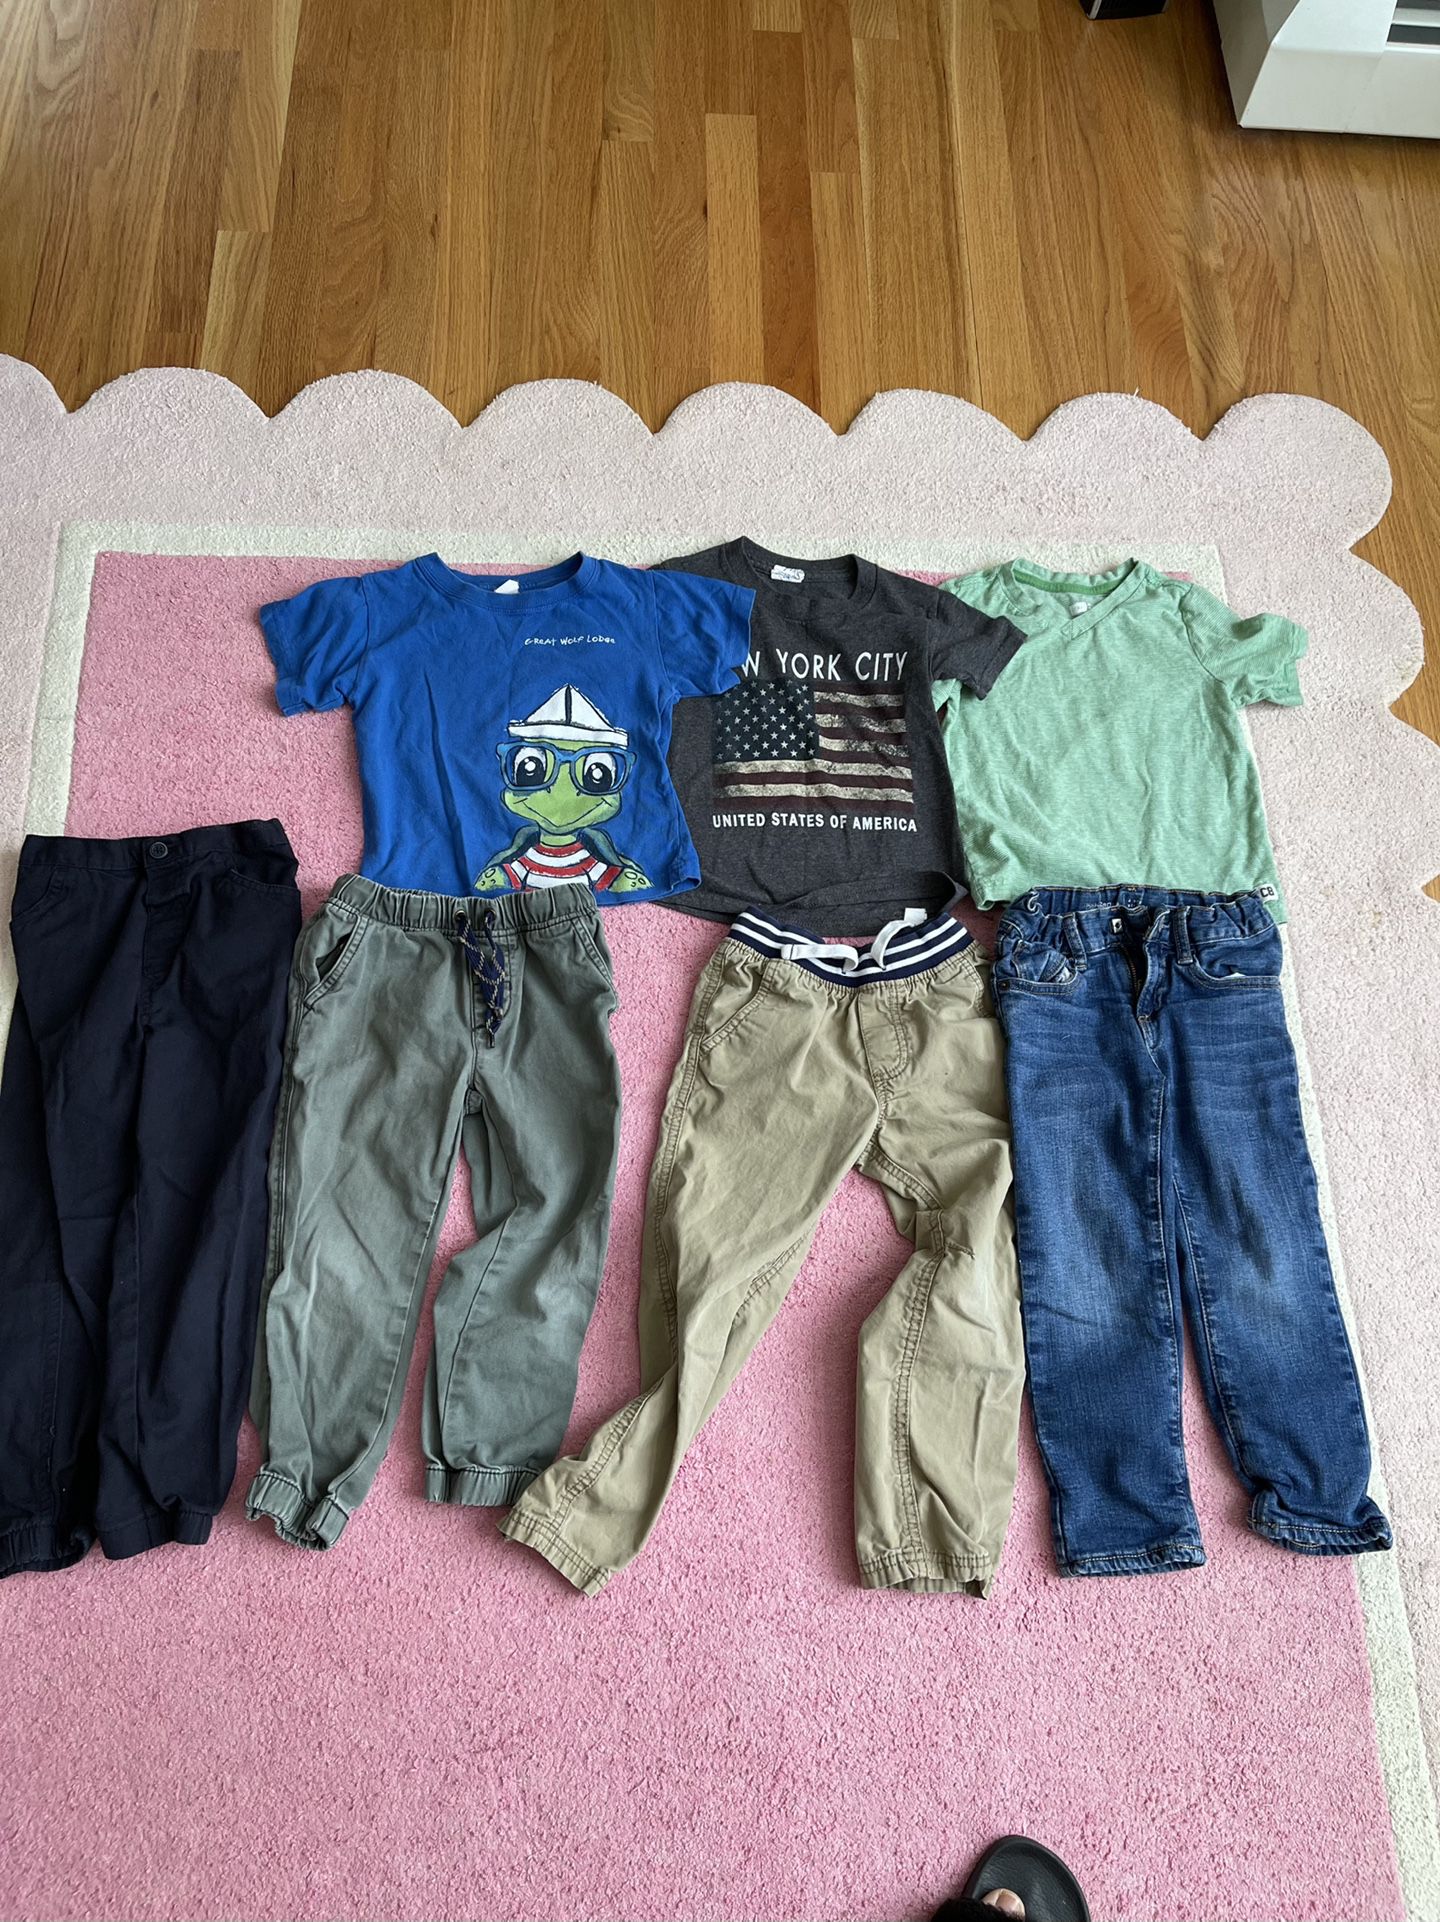 Boy’s Clothes Size 4t In Good Condition $15 For All